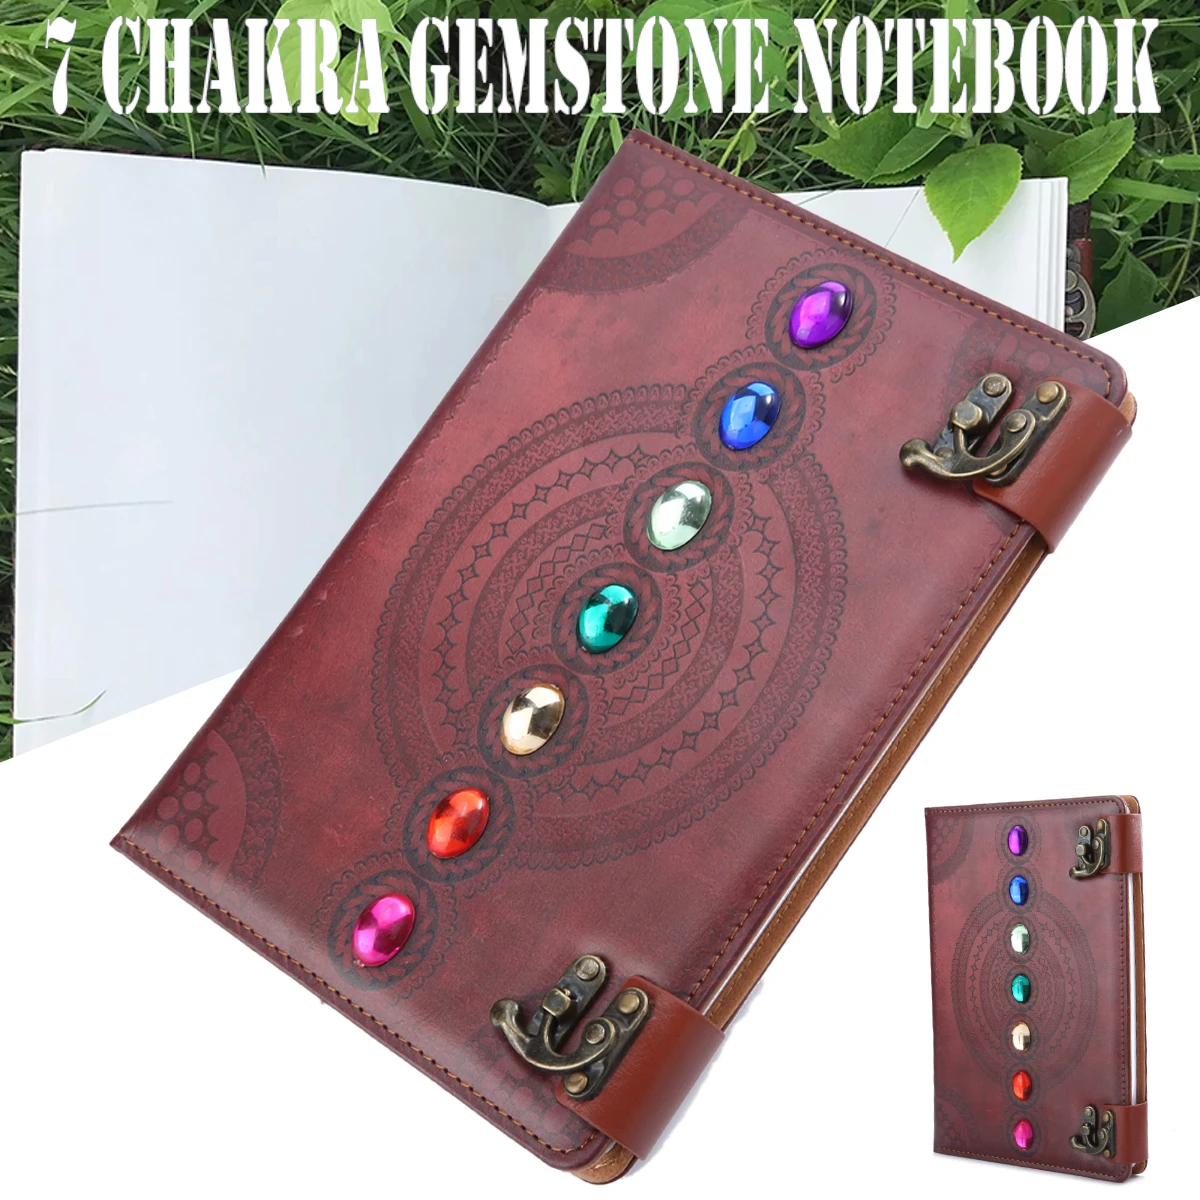 New Arrival Diary Weekly Planner Notebook Chakra Gemstone Leather Work Study Plan Notepad Journal Notebook Stationery new arrival 52 sheets business memo pad planner notepad daily to do it study schedule plan paperlaria school office stationery